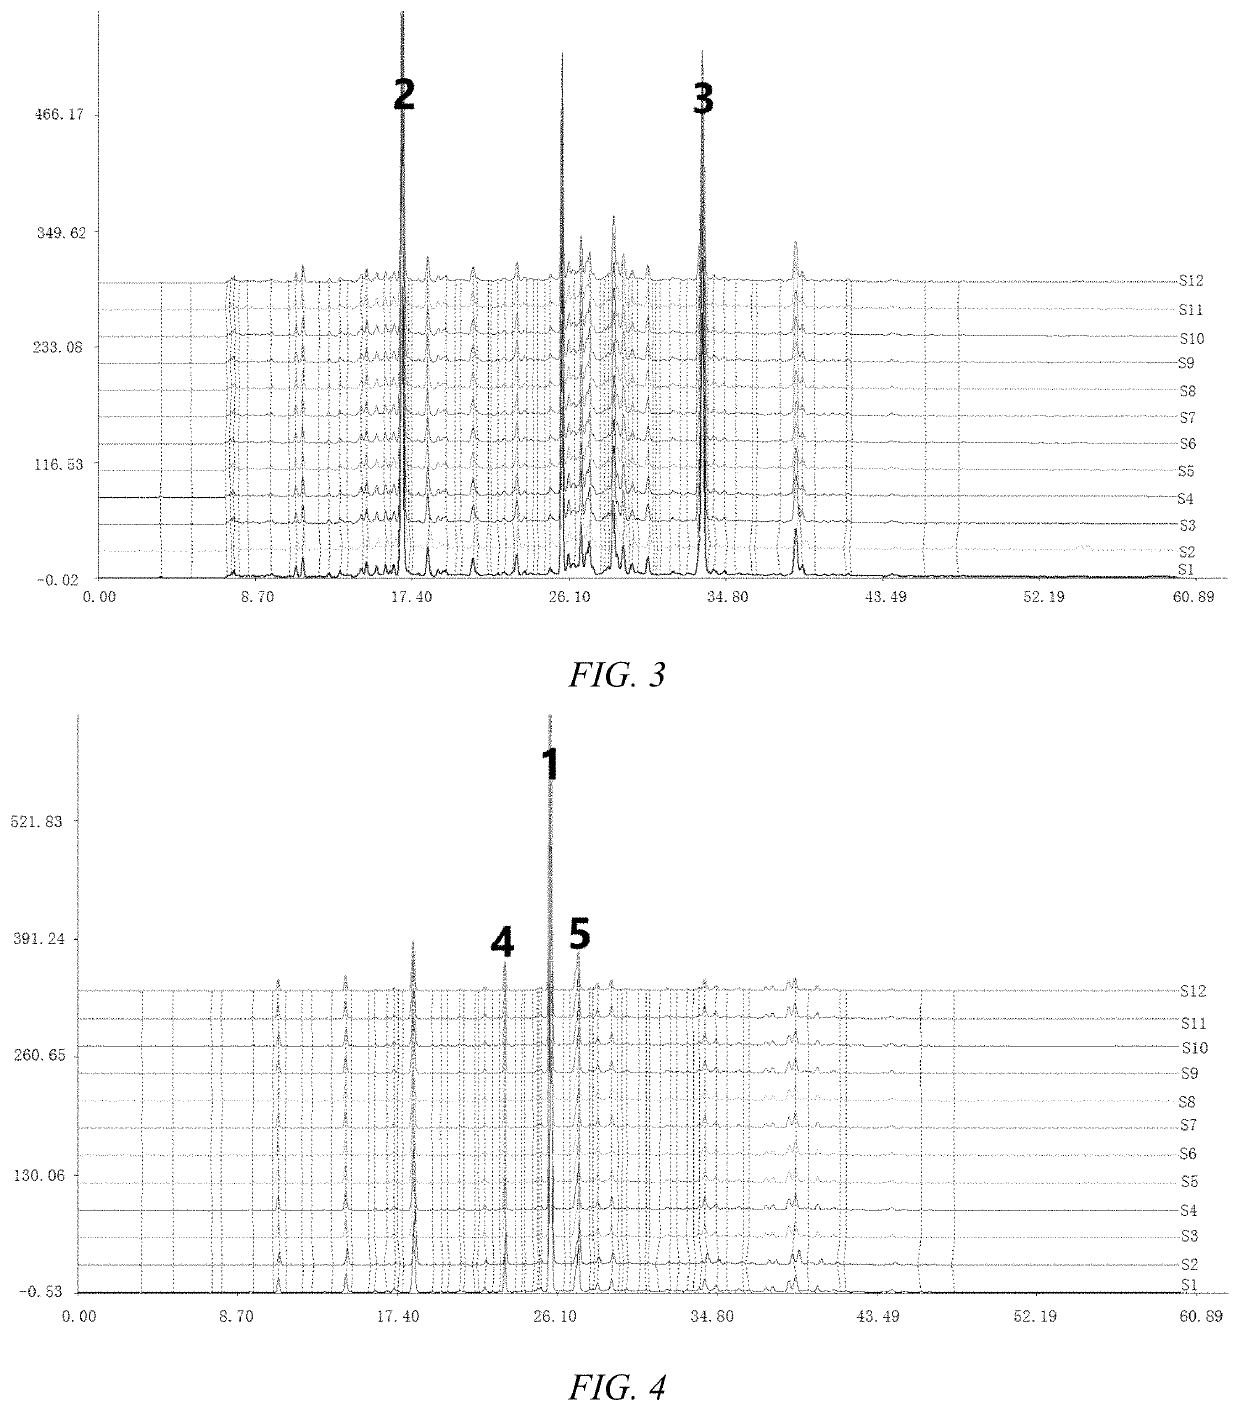 Syringa pubescens seed extract, its preparation and application in antibiotic-resistant infections